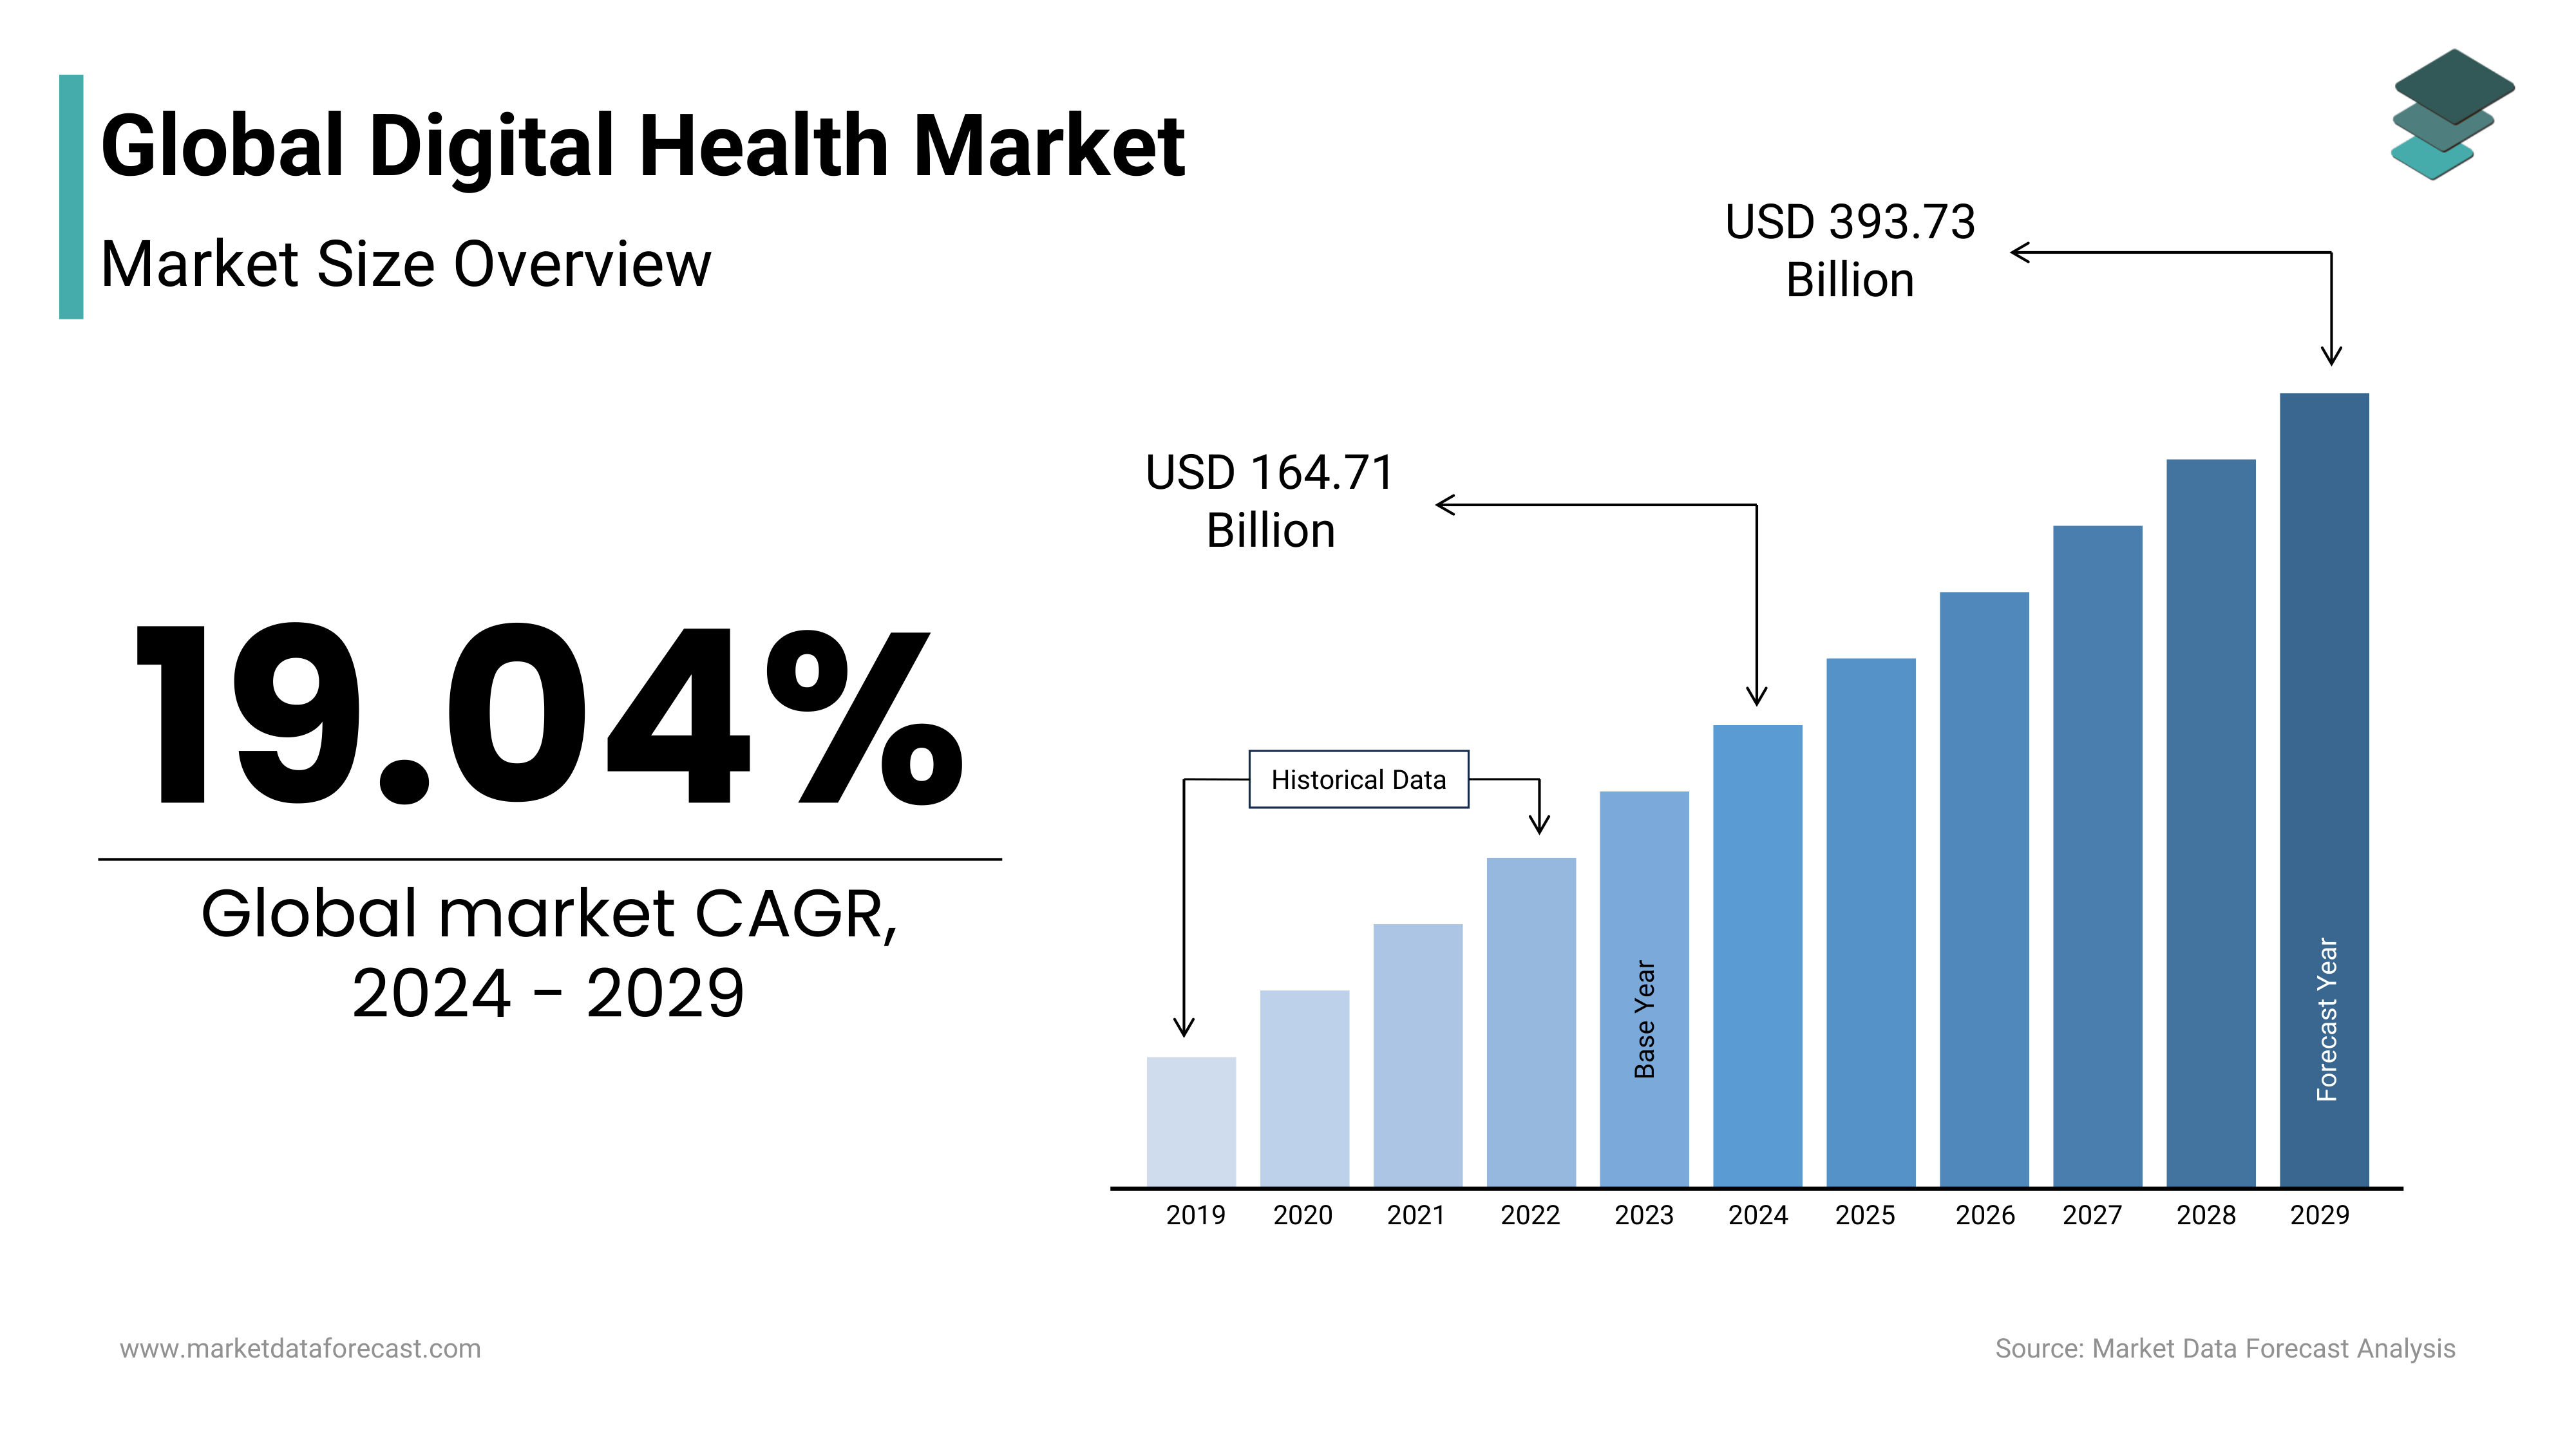 The global digital health market expected to witness a significant growth rate of 19.04% by 2029